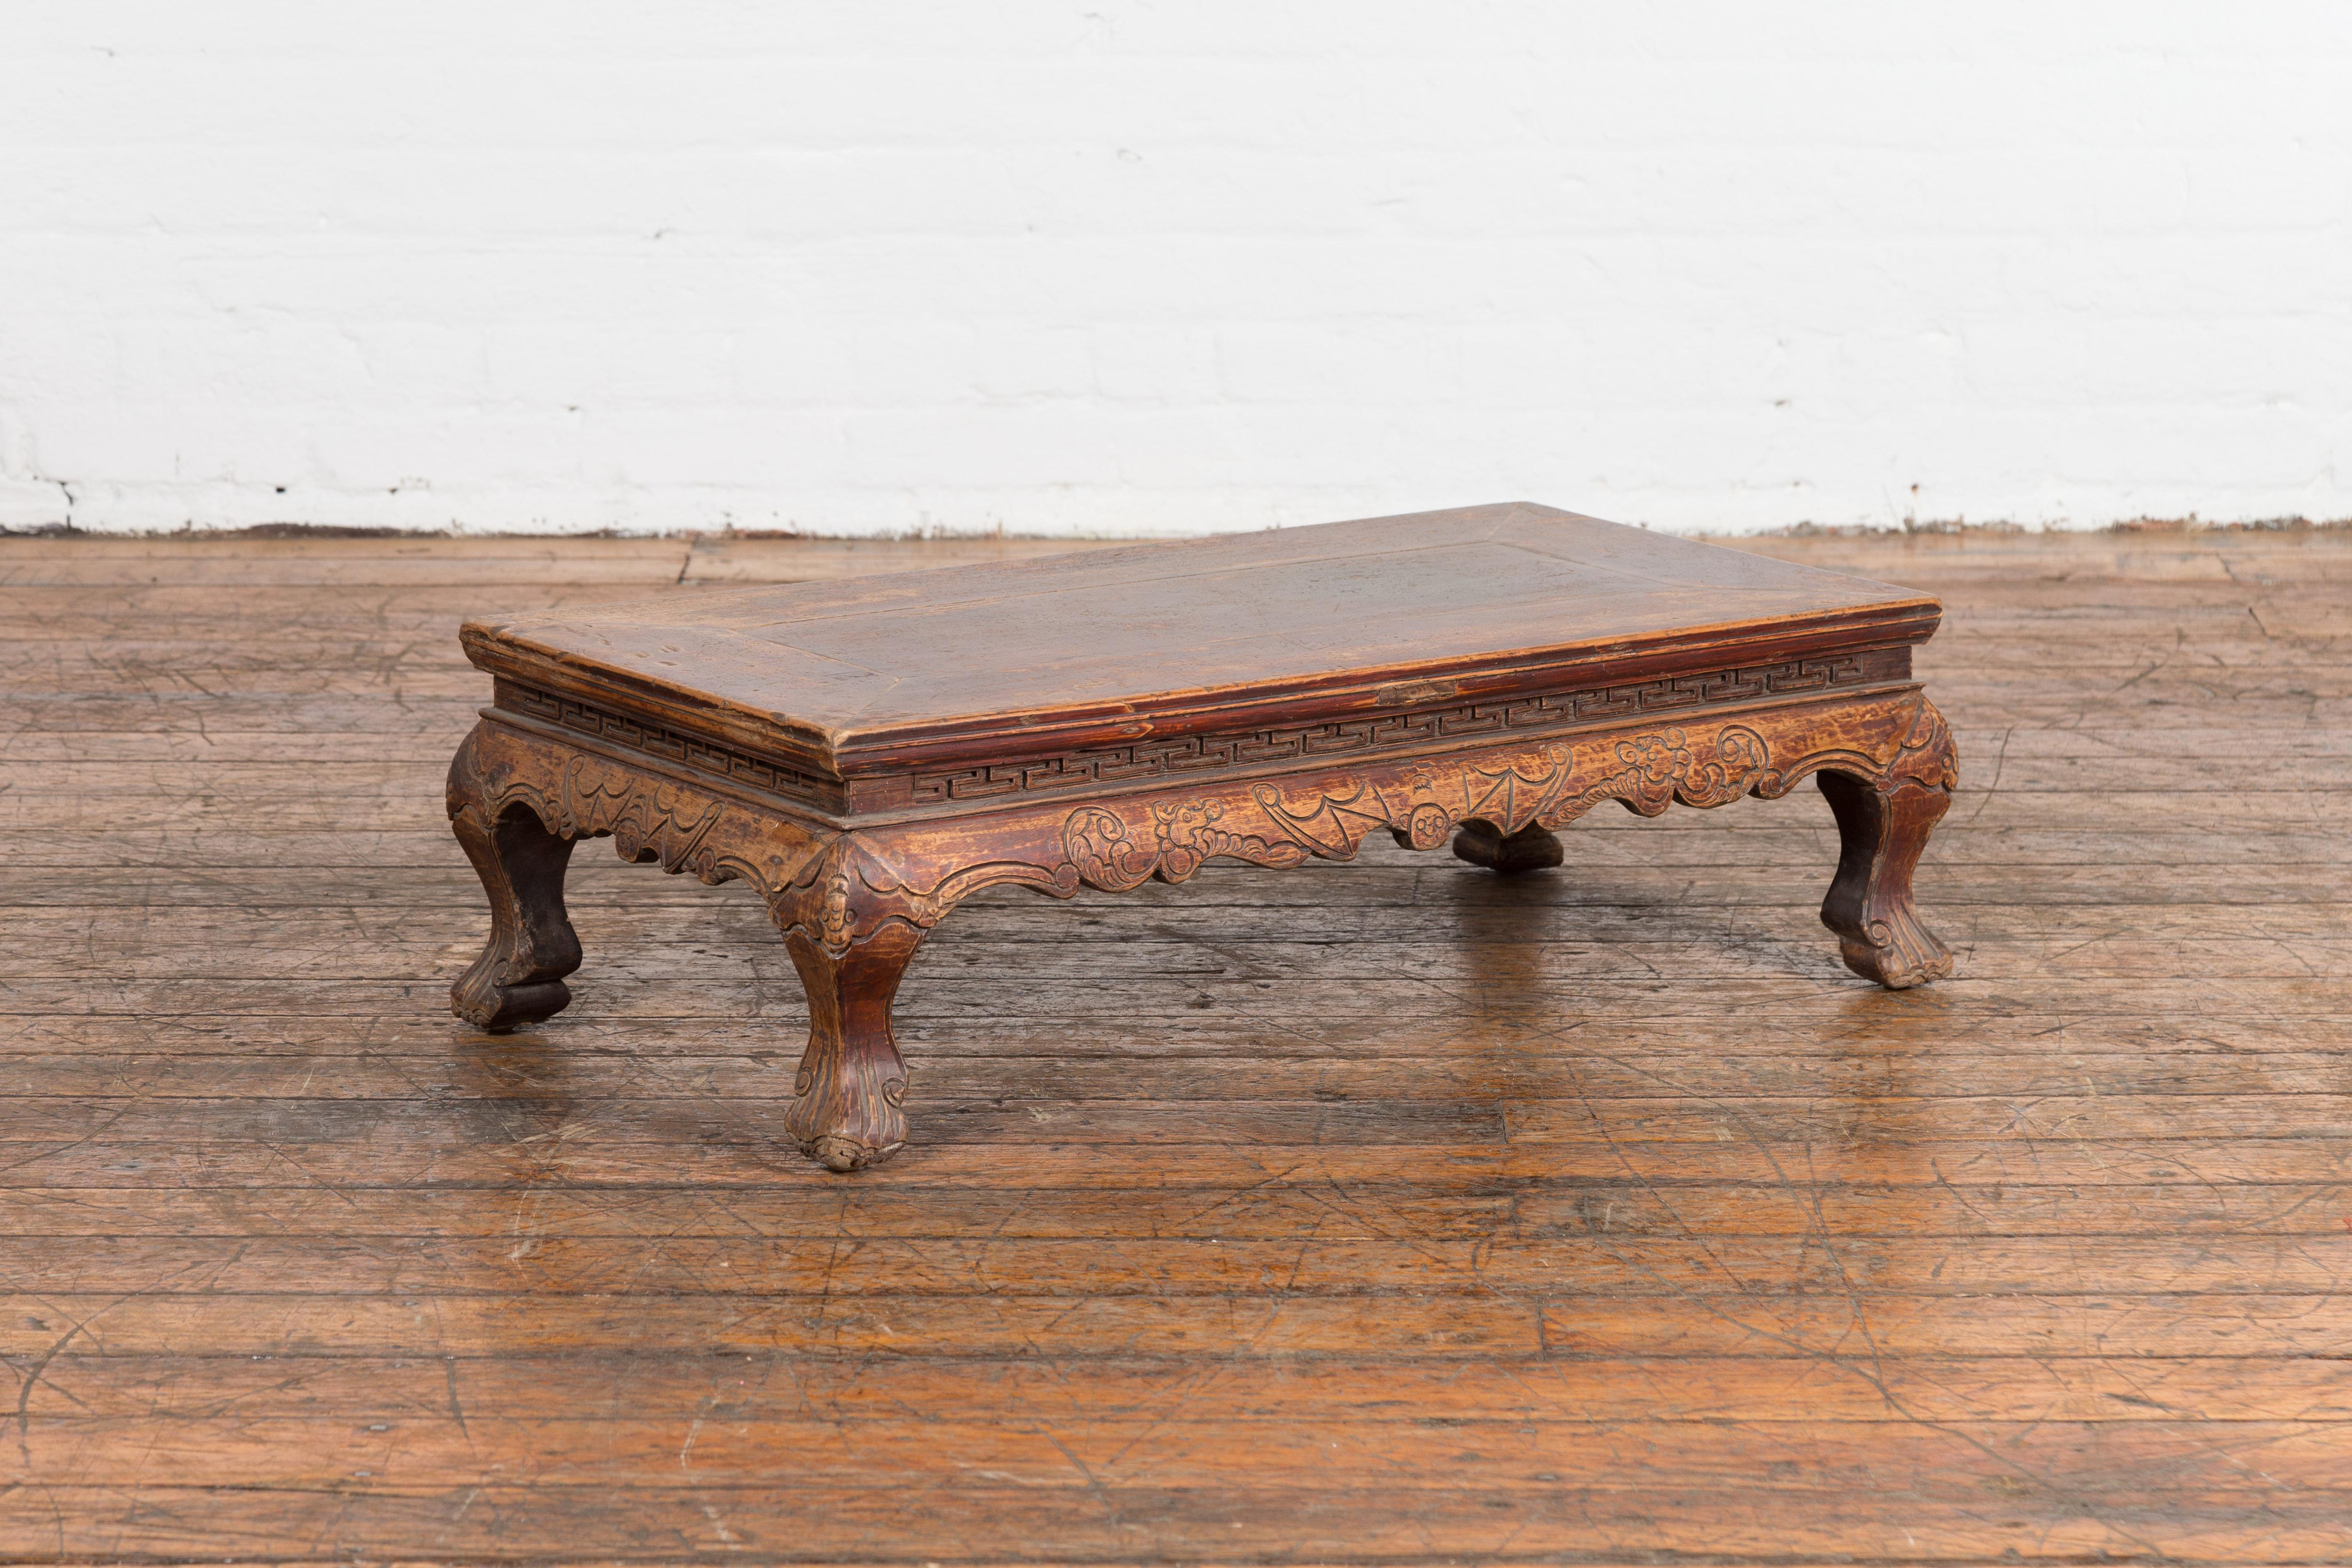 A Chinese Qing Dynasty period low Kang coffee table from the 19th century with carved meander motifs, bats, scrolling clouds and cabriole legs. Dating back to the 19th century, this Chinese low Kang coffee table is a stunning relic from the Qing